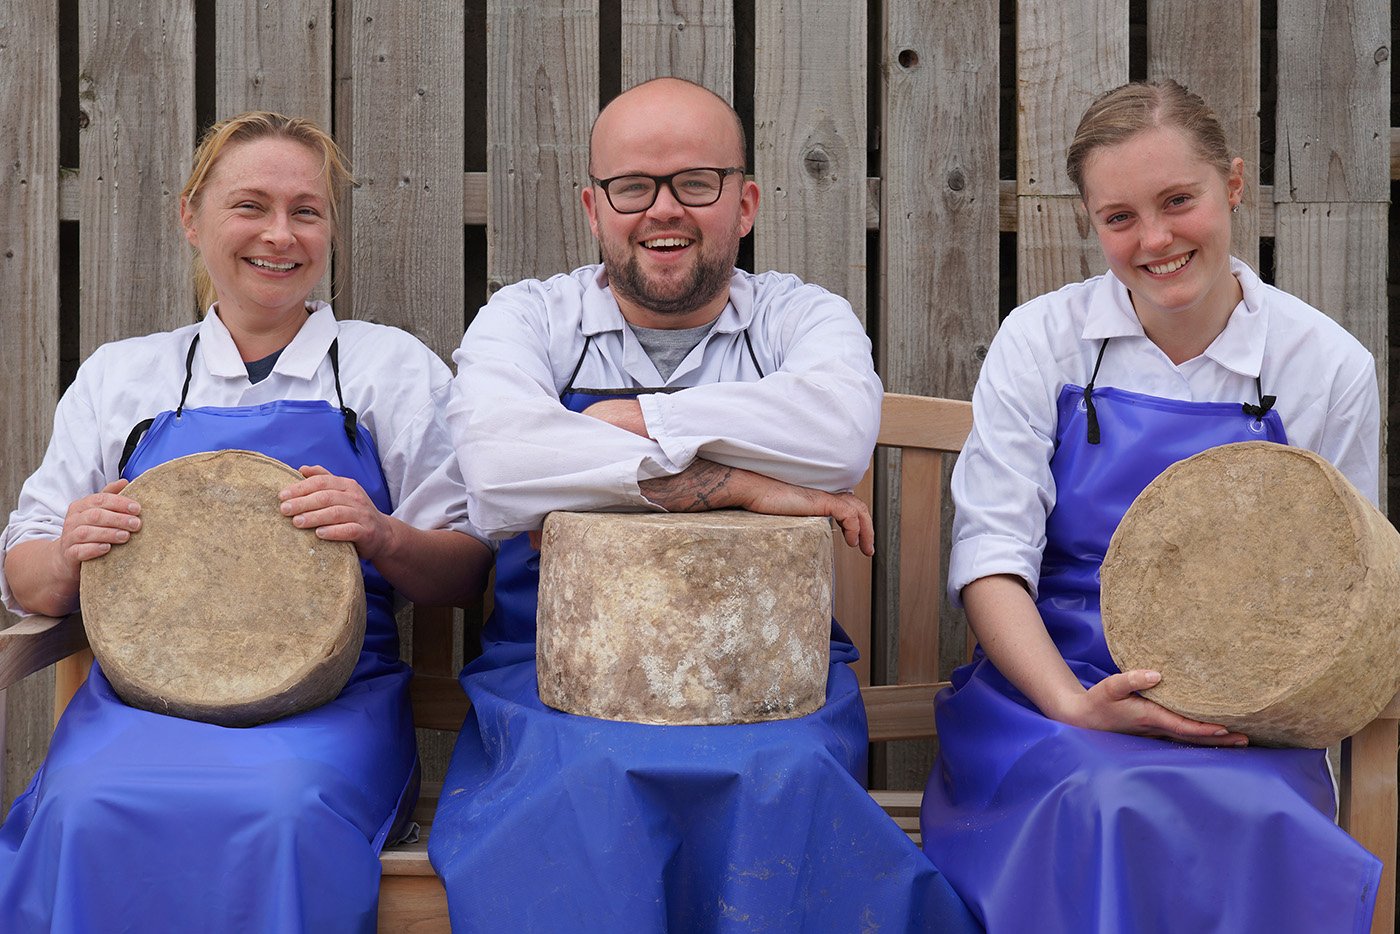 The three award winning cheese makers at Torpenhow, holding rounds of cheese